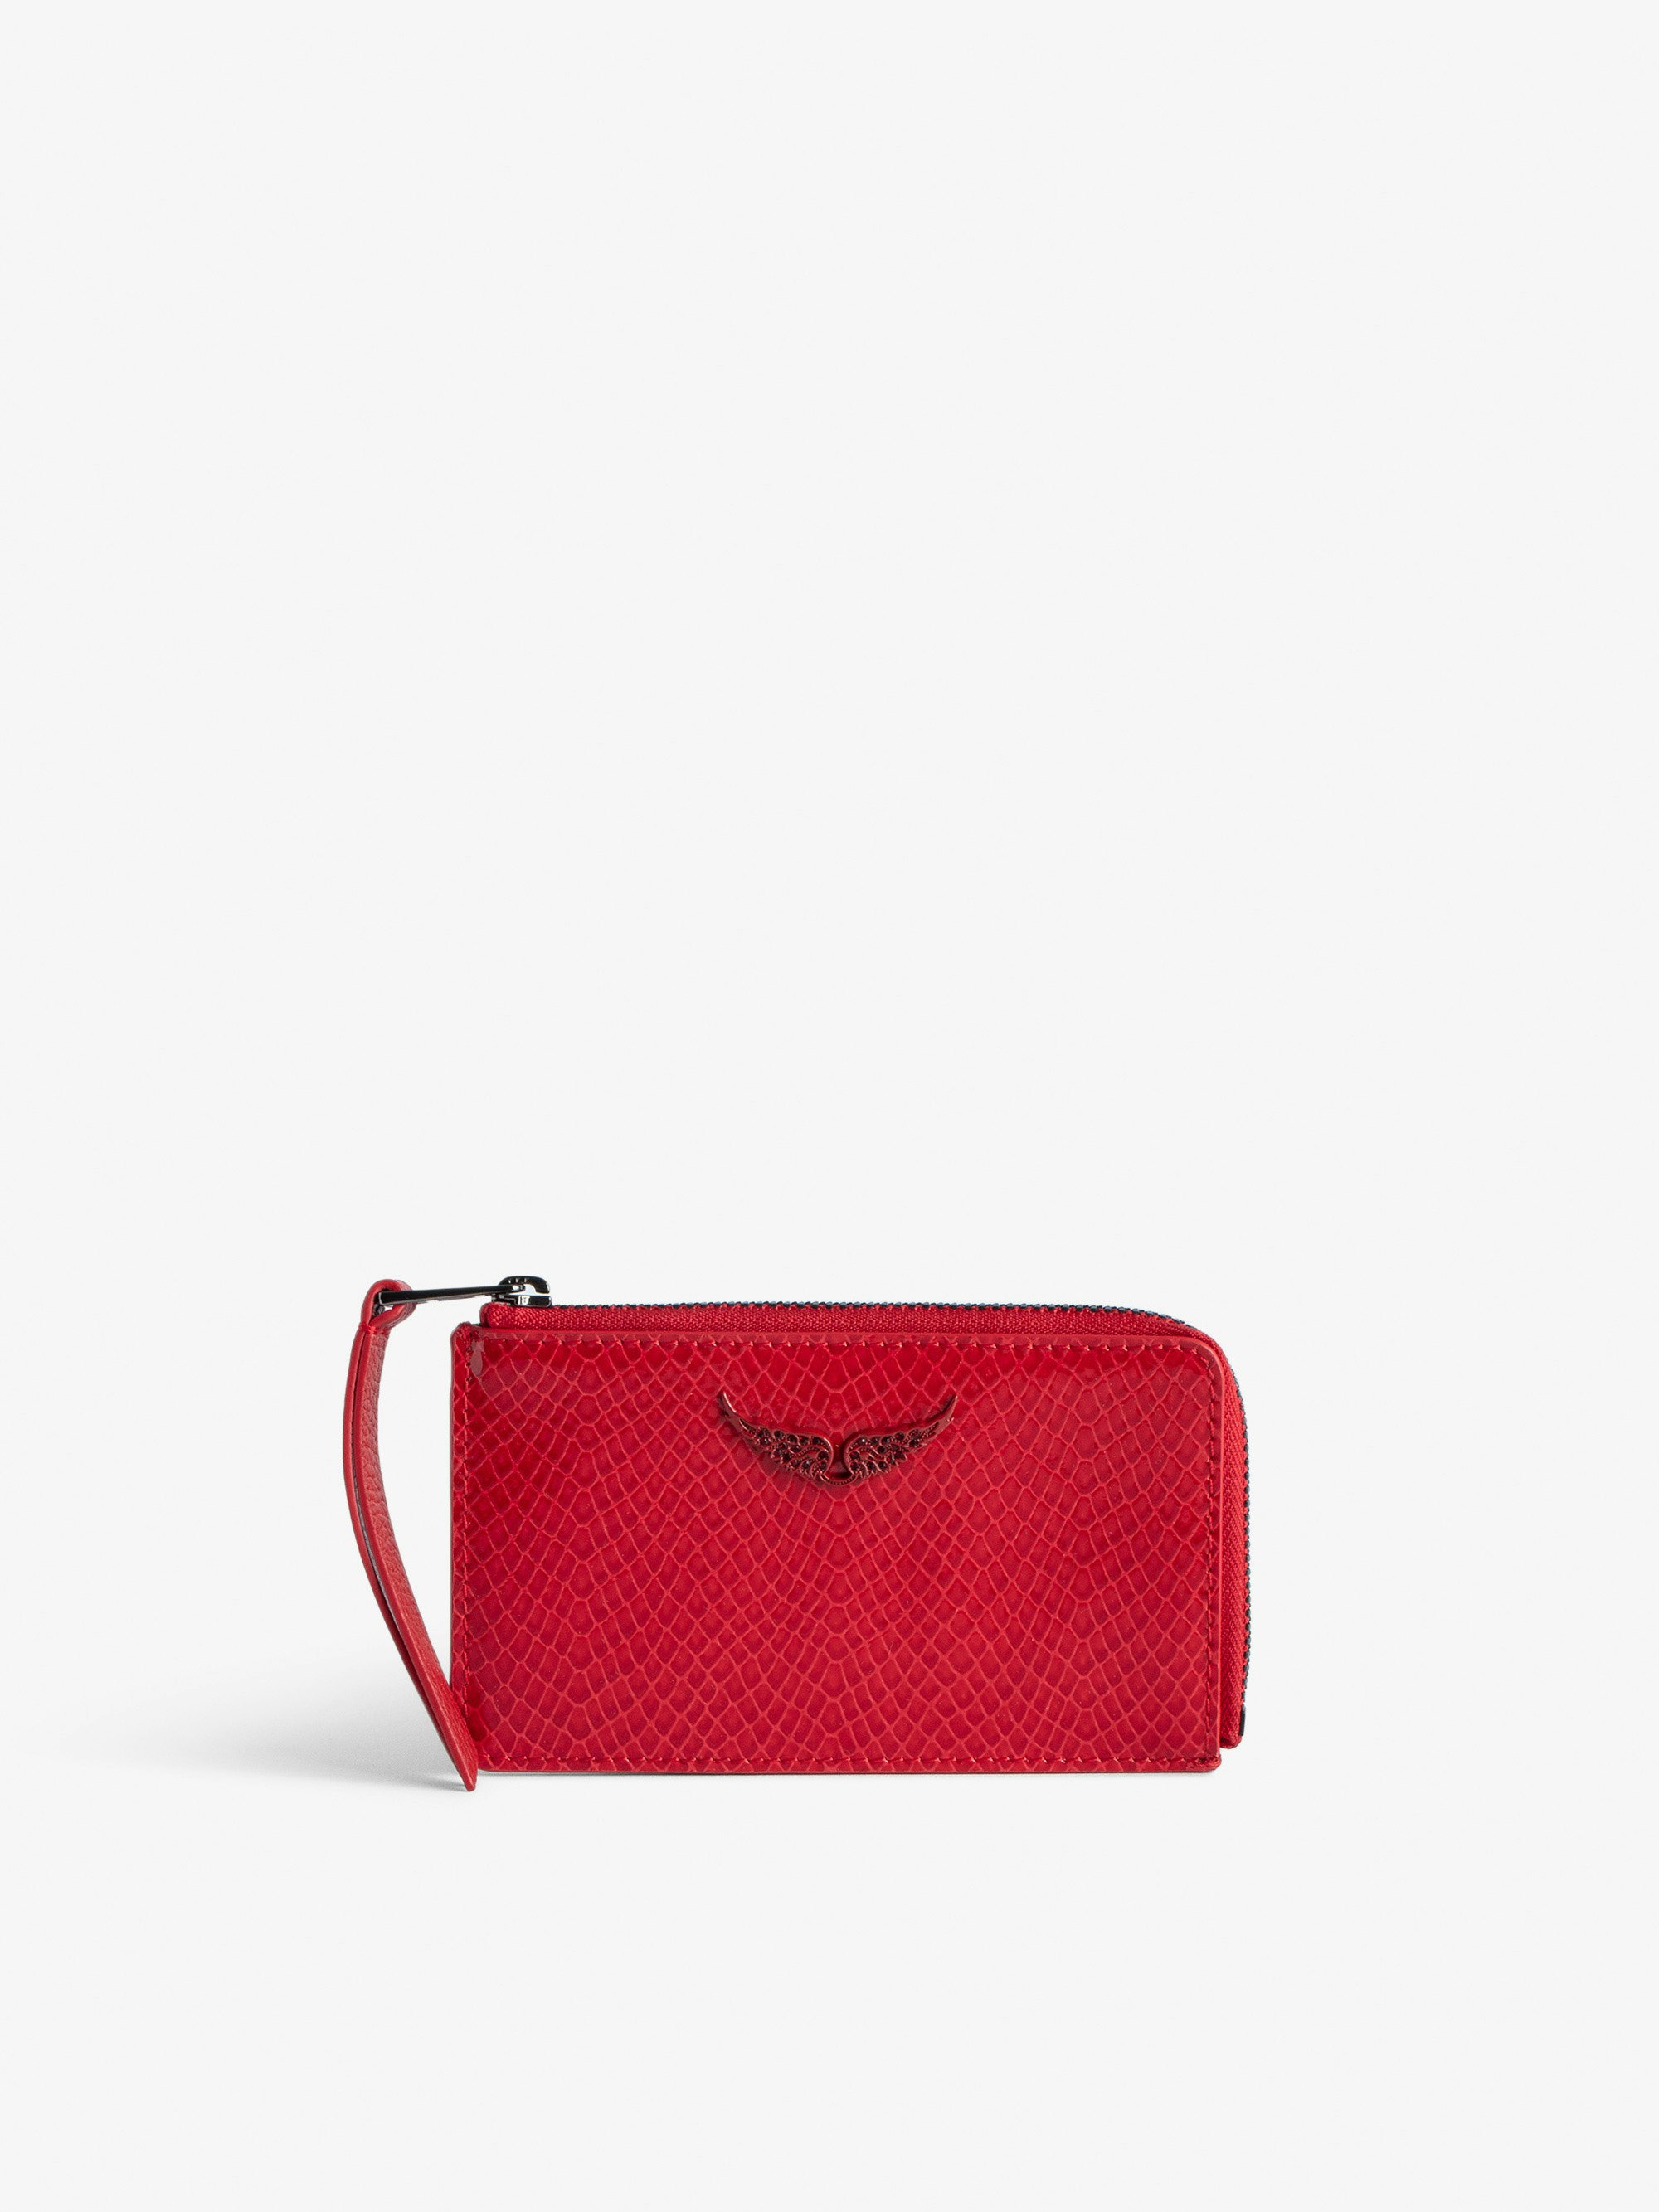 ZV Card Glossy Wild Embossed Card Holder - Women’s red python-effect patent leather card holder with wings charm.